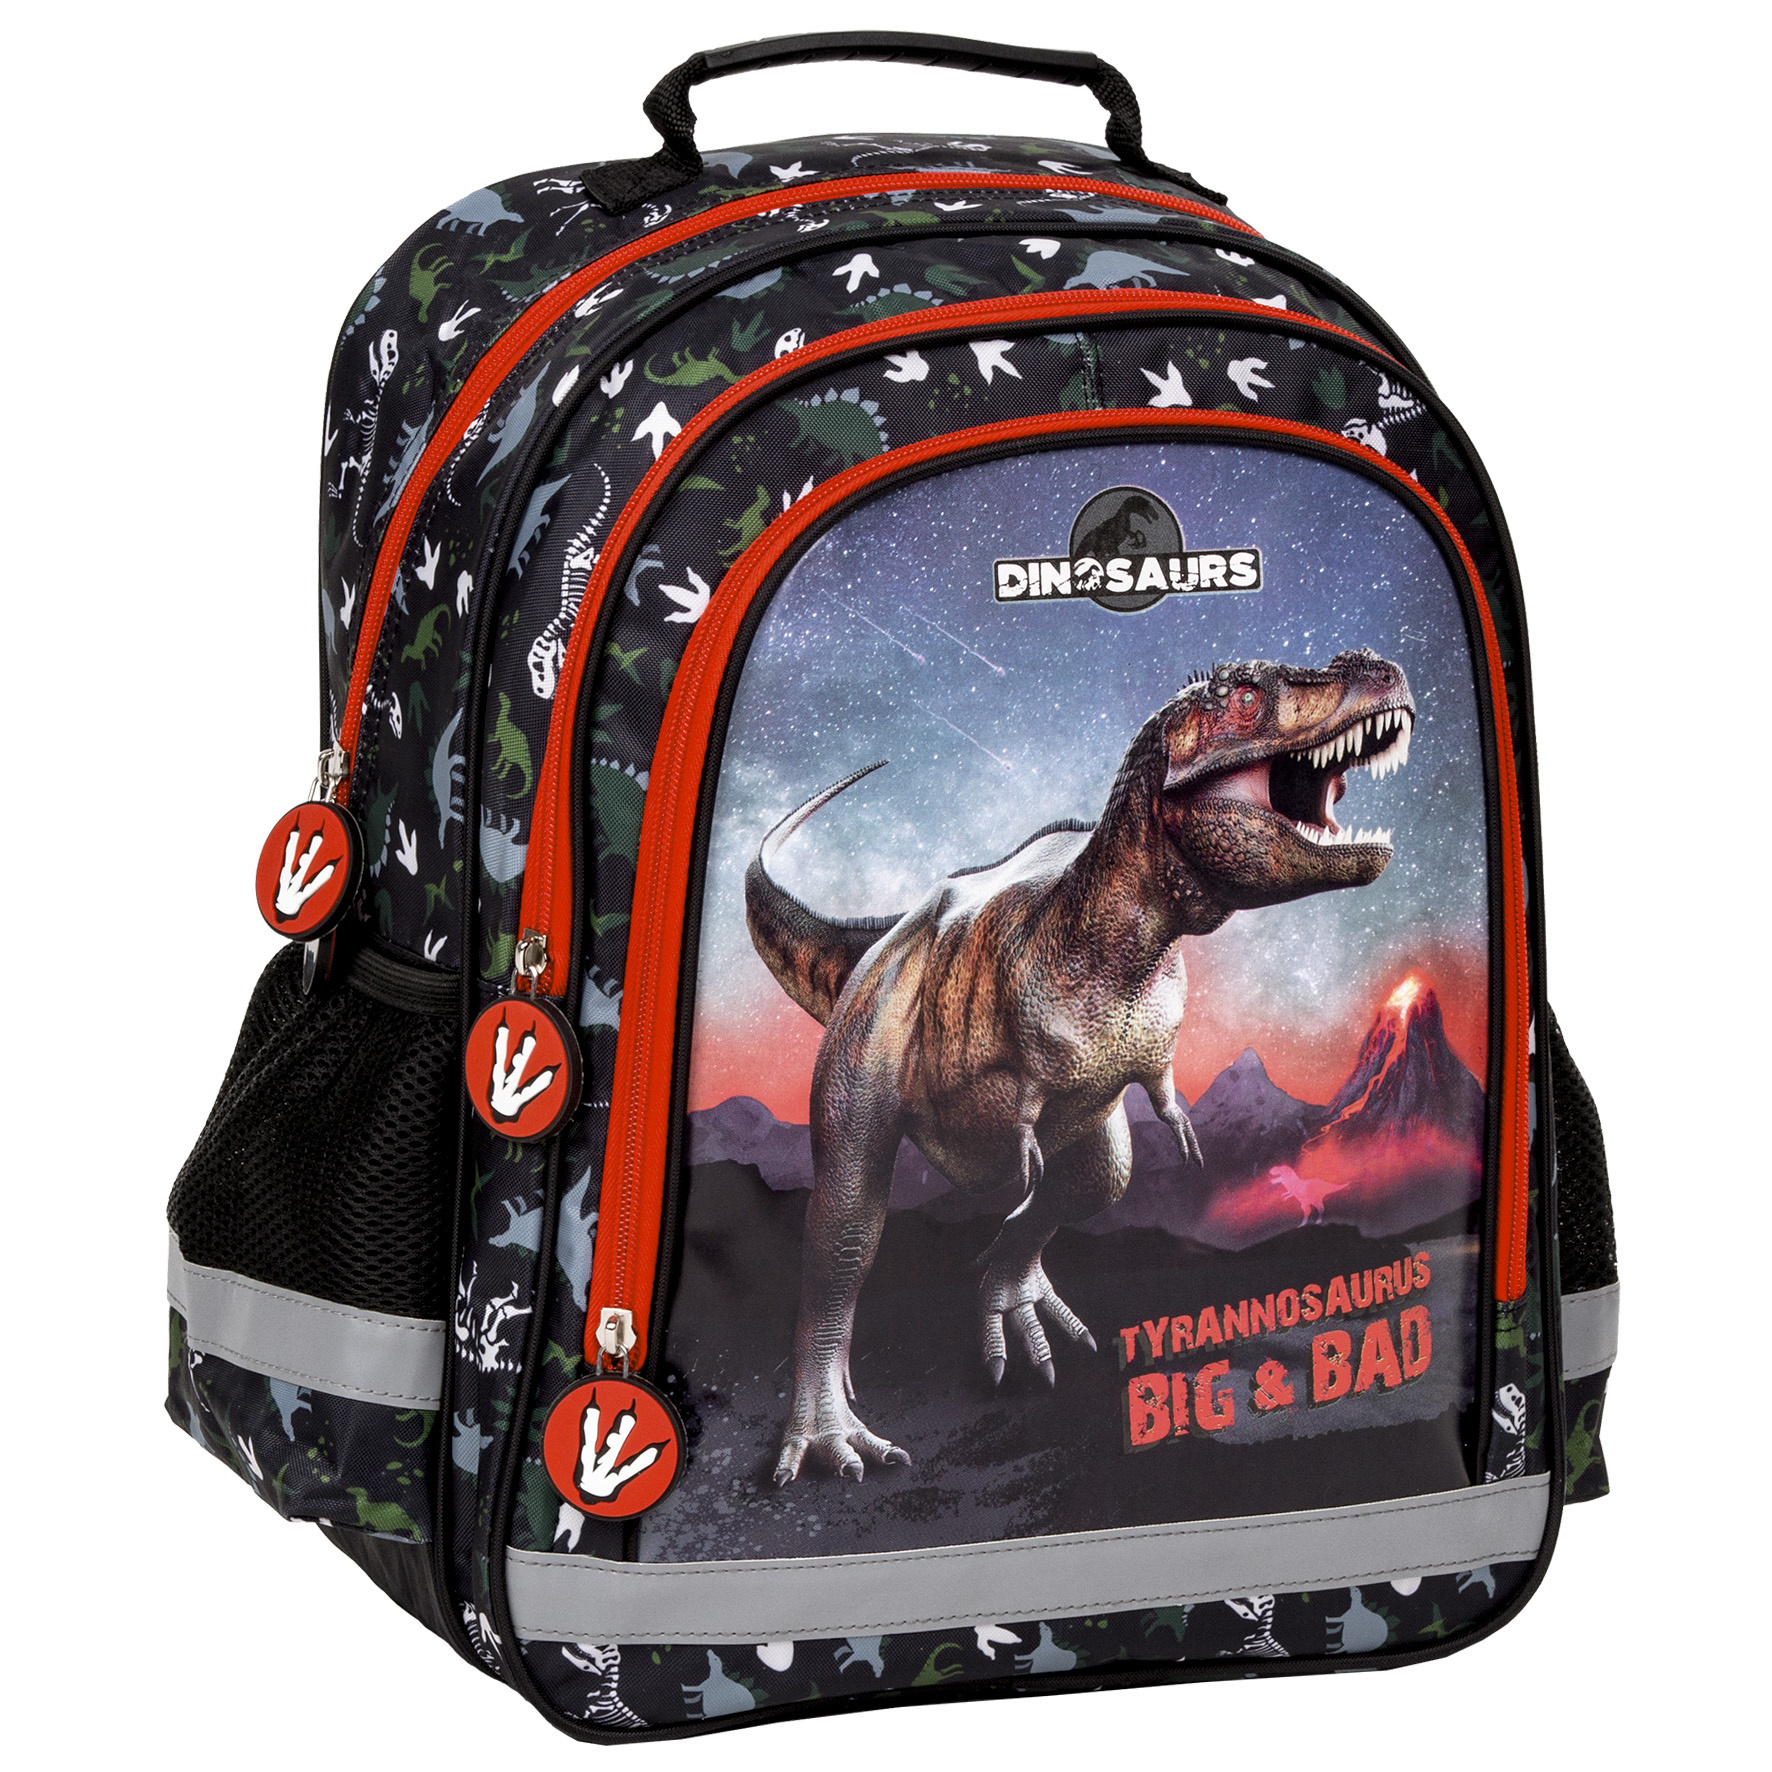 Dinosaurus Backpack Big and Bad - 38 x 29 x 15 cm - Polyester